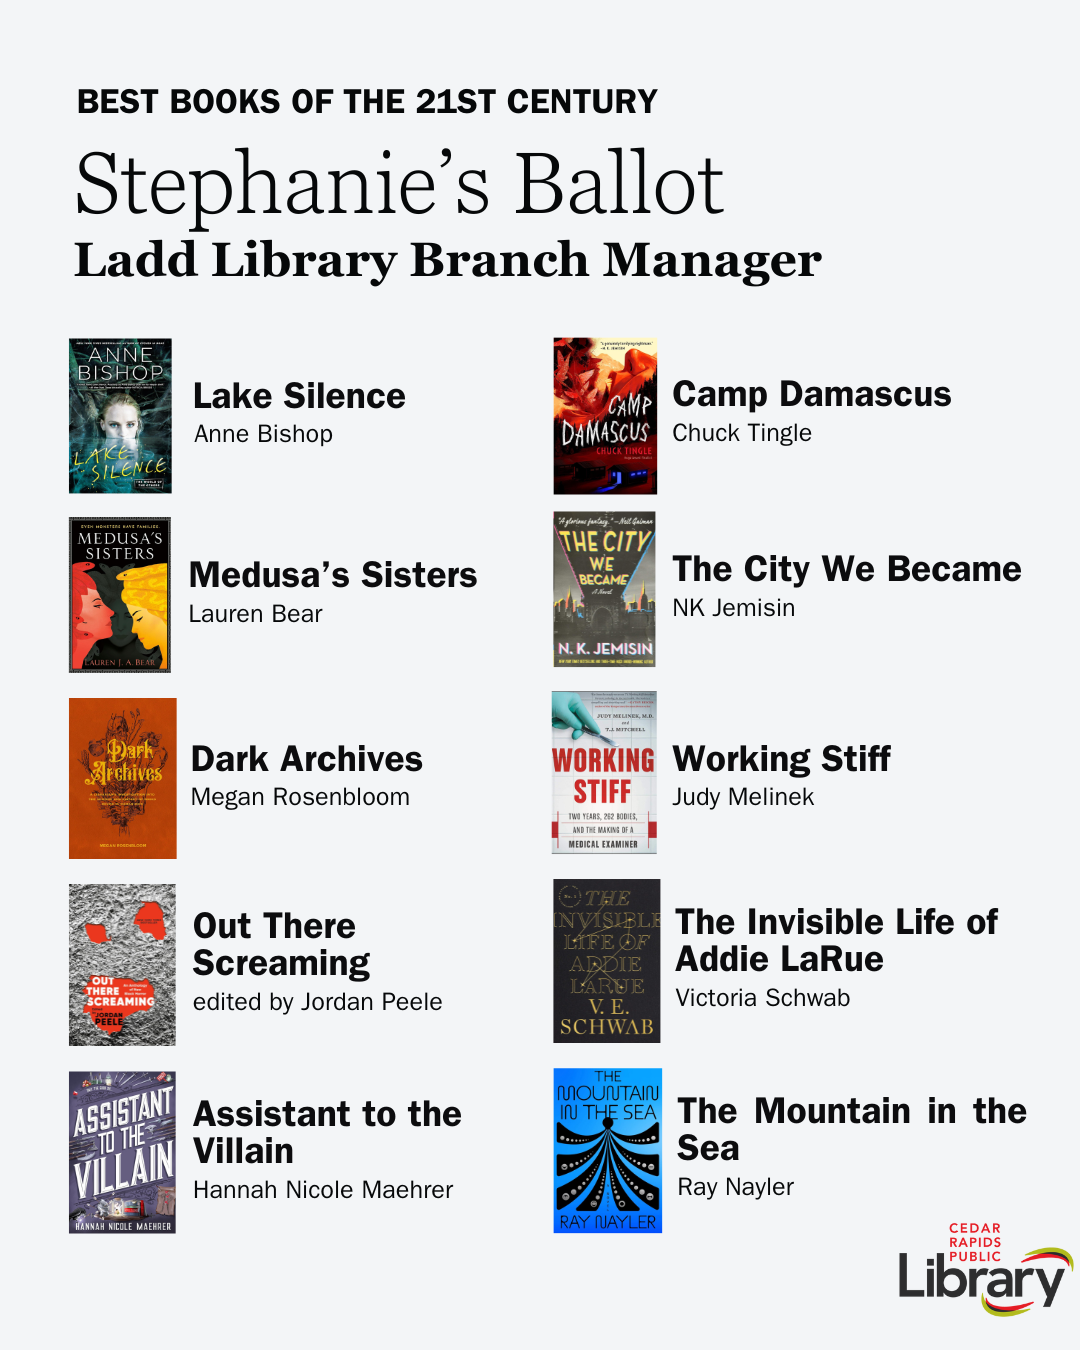 A graphic shows Branch Manager Stephanies's Ballot for Best Books of the 21st Century